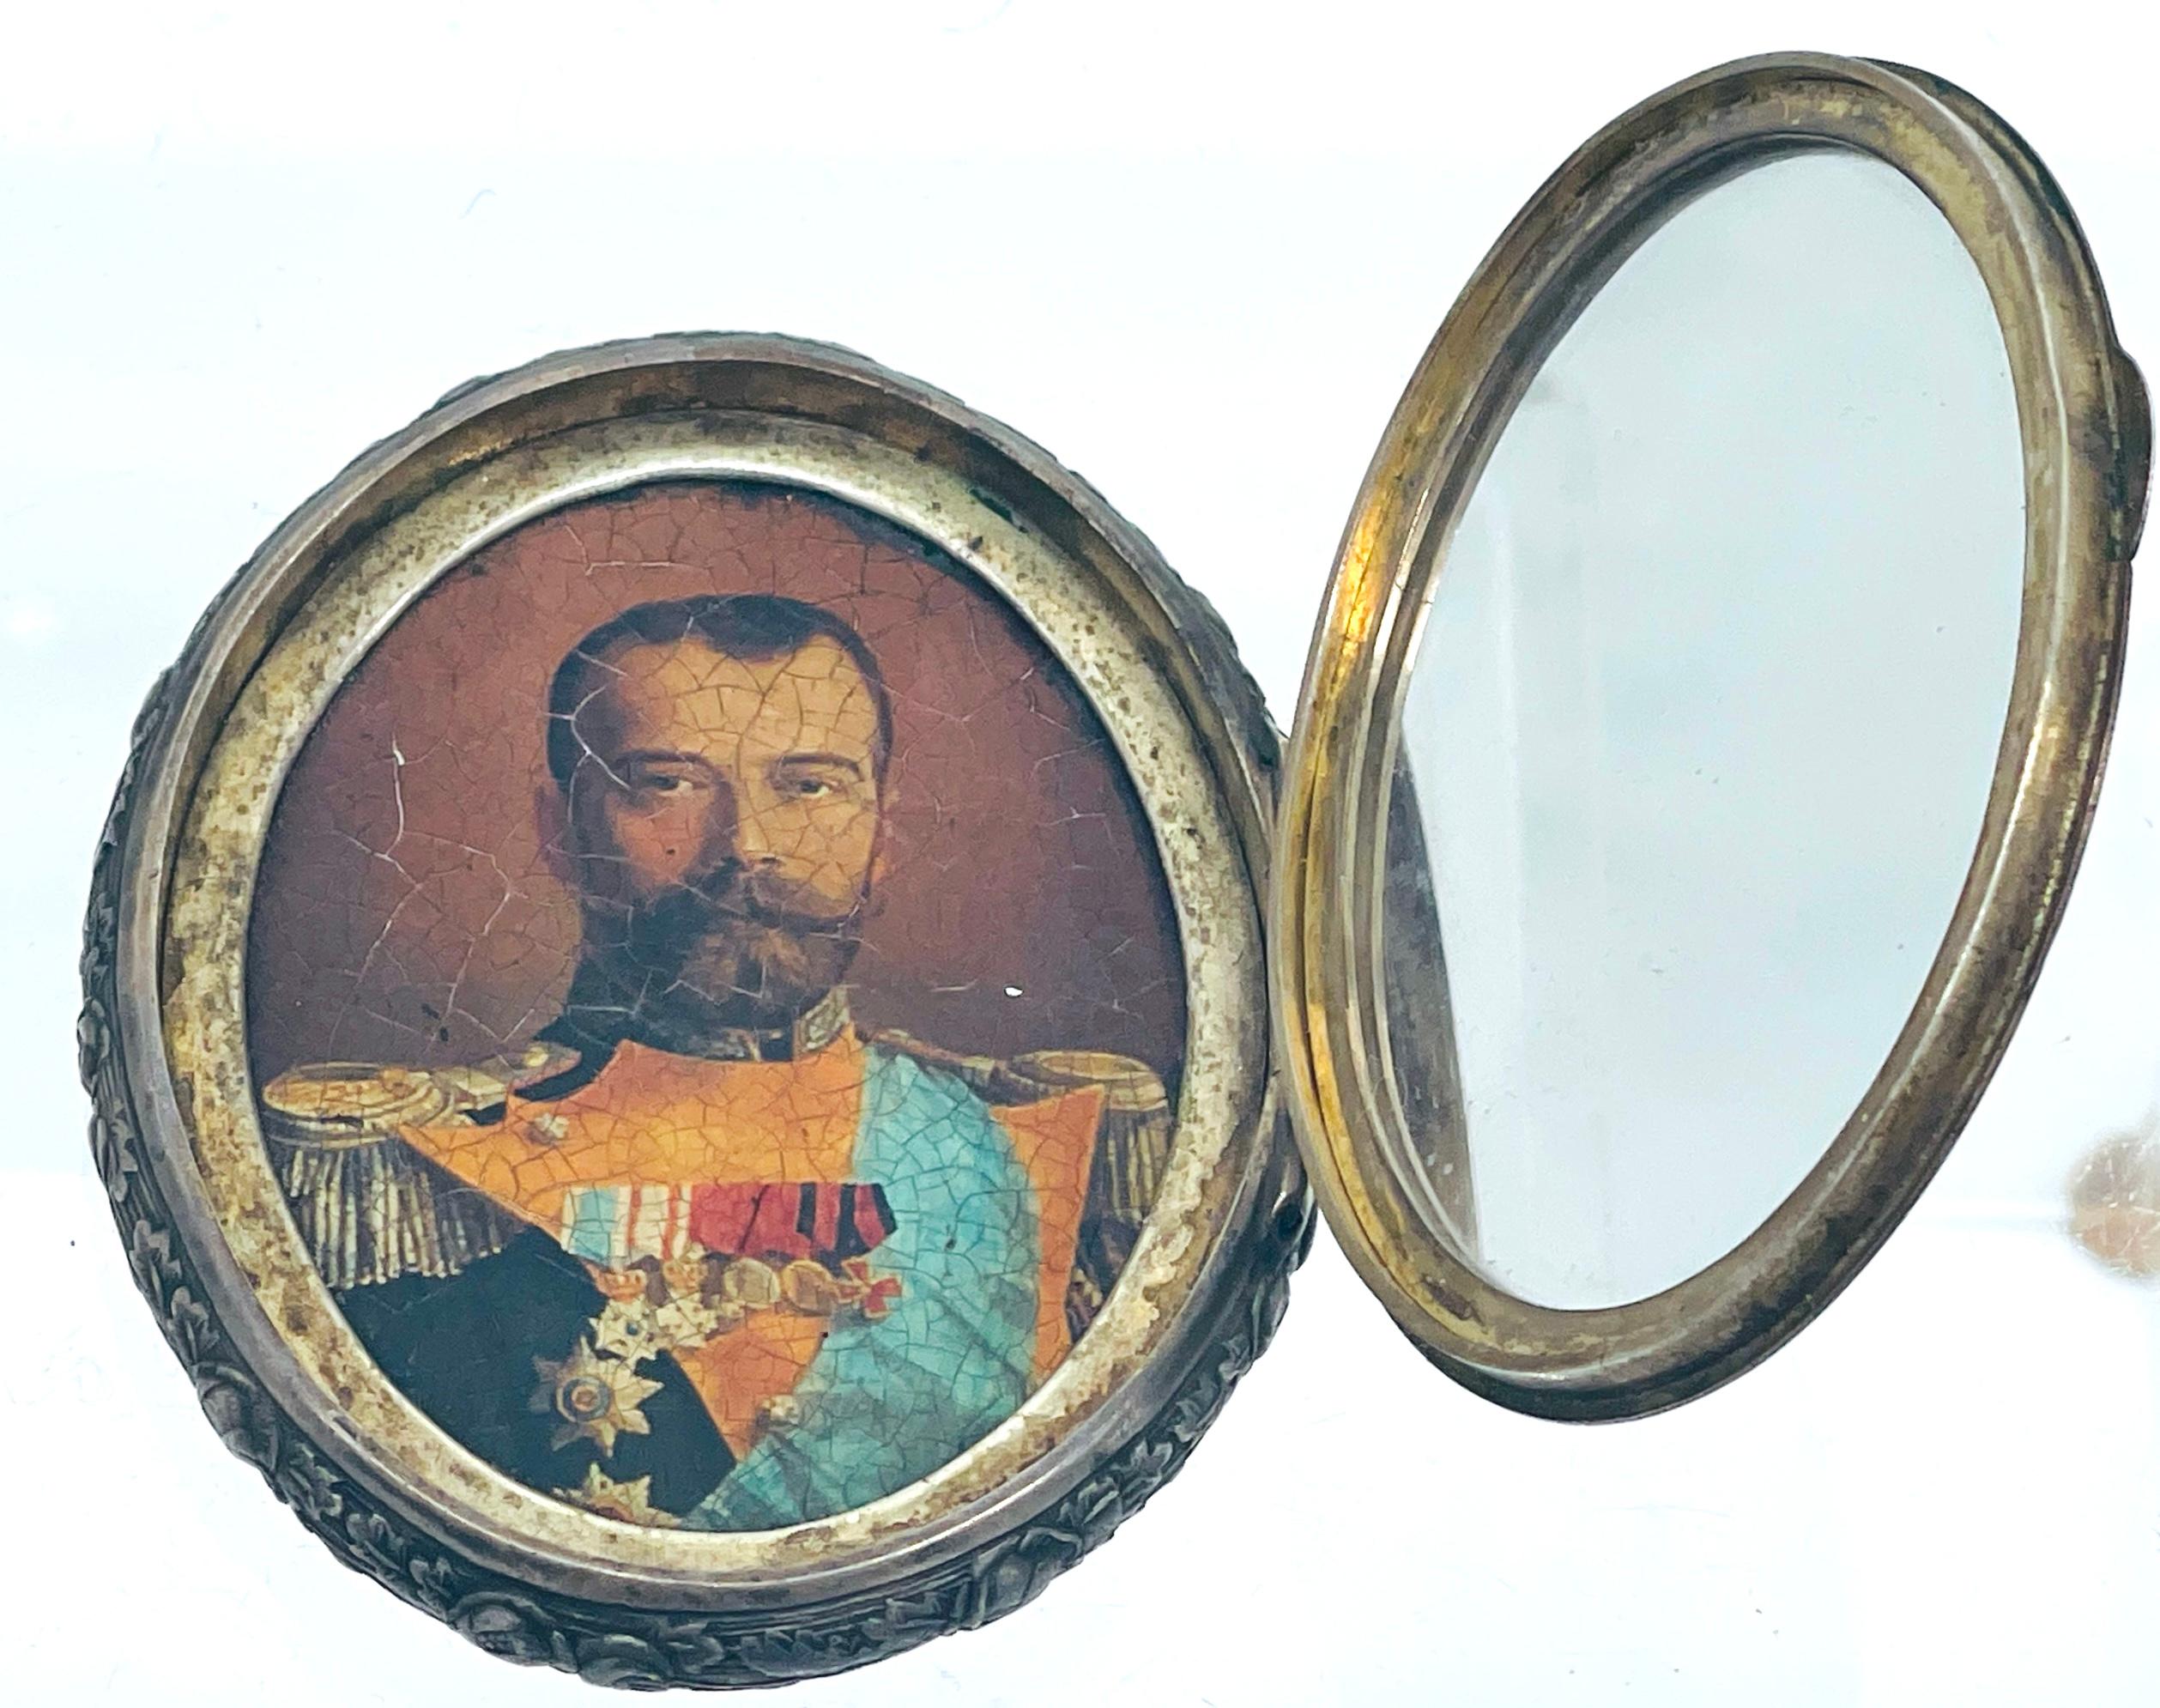 An exceptional Objet'd'Art, a Russian Silver 1913 Commemorative Travel Icon, is a poignant tribute to the reign of Czar Nicholas II. Made in 1913 to commemorate the Great Pilgrimage of Emperor Nicholas II, this rare piece offers a glimpse into the